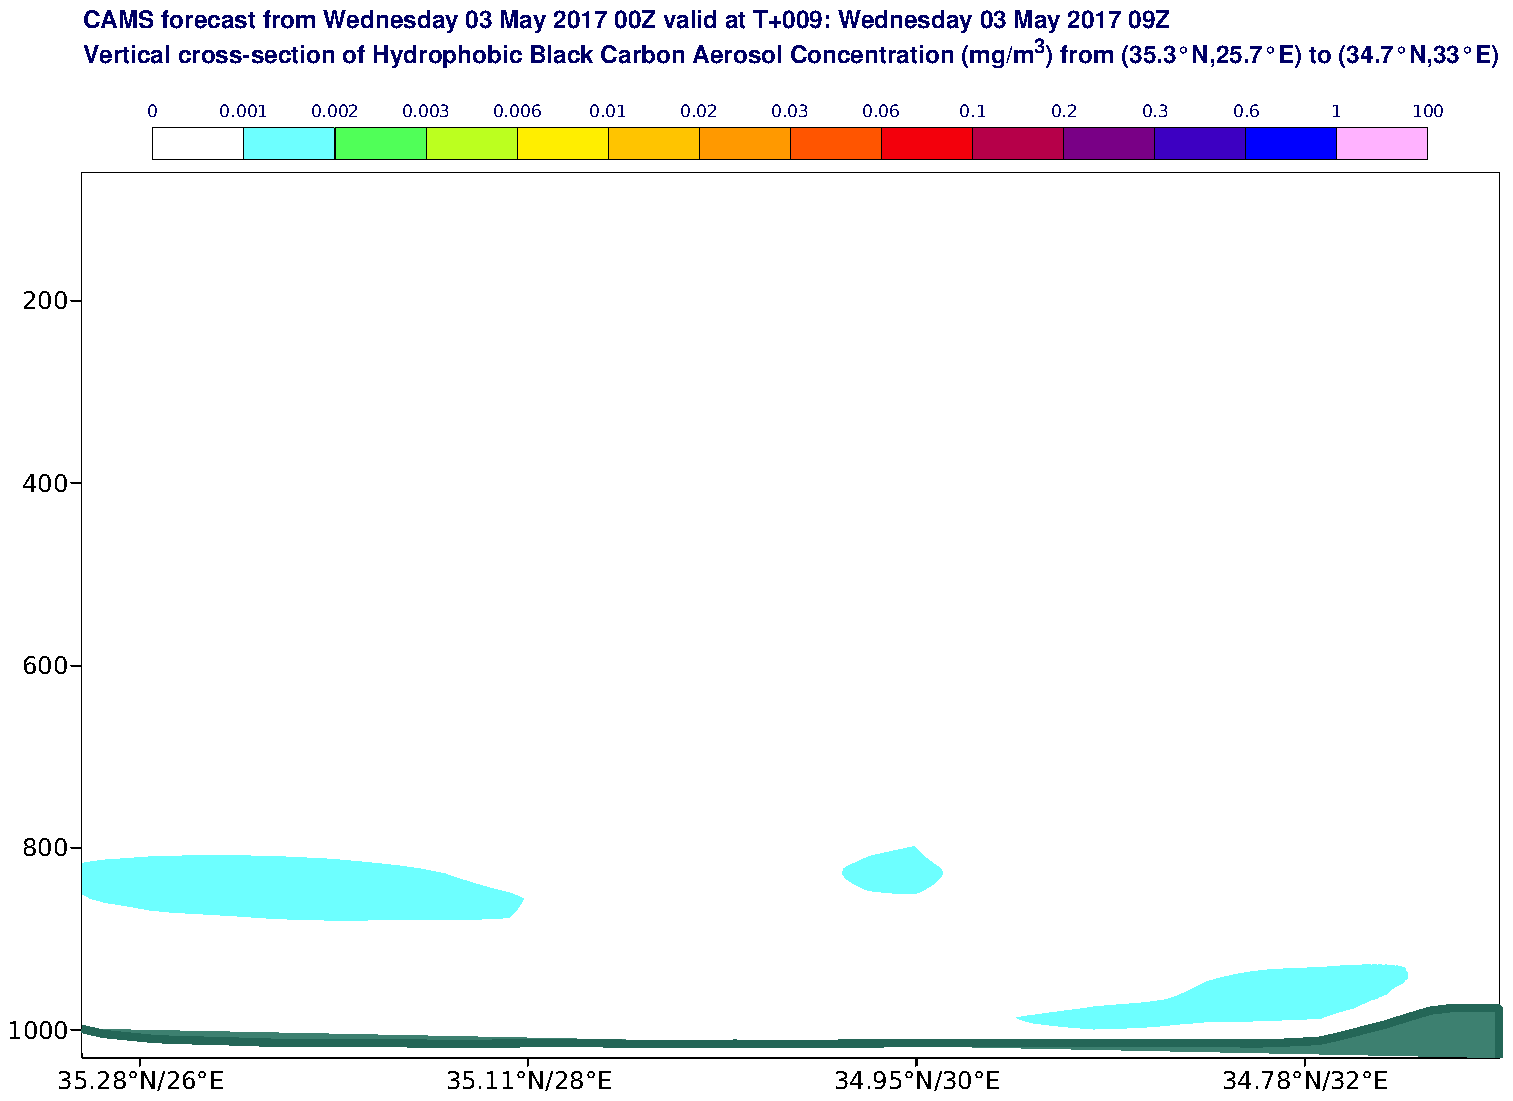 Vertical cross-section of Hydrophobic Black Carbon Aerosol Concentration (mg/m3) valid at T9 - 2017-05-03 09:00